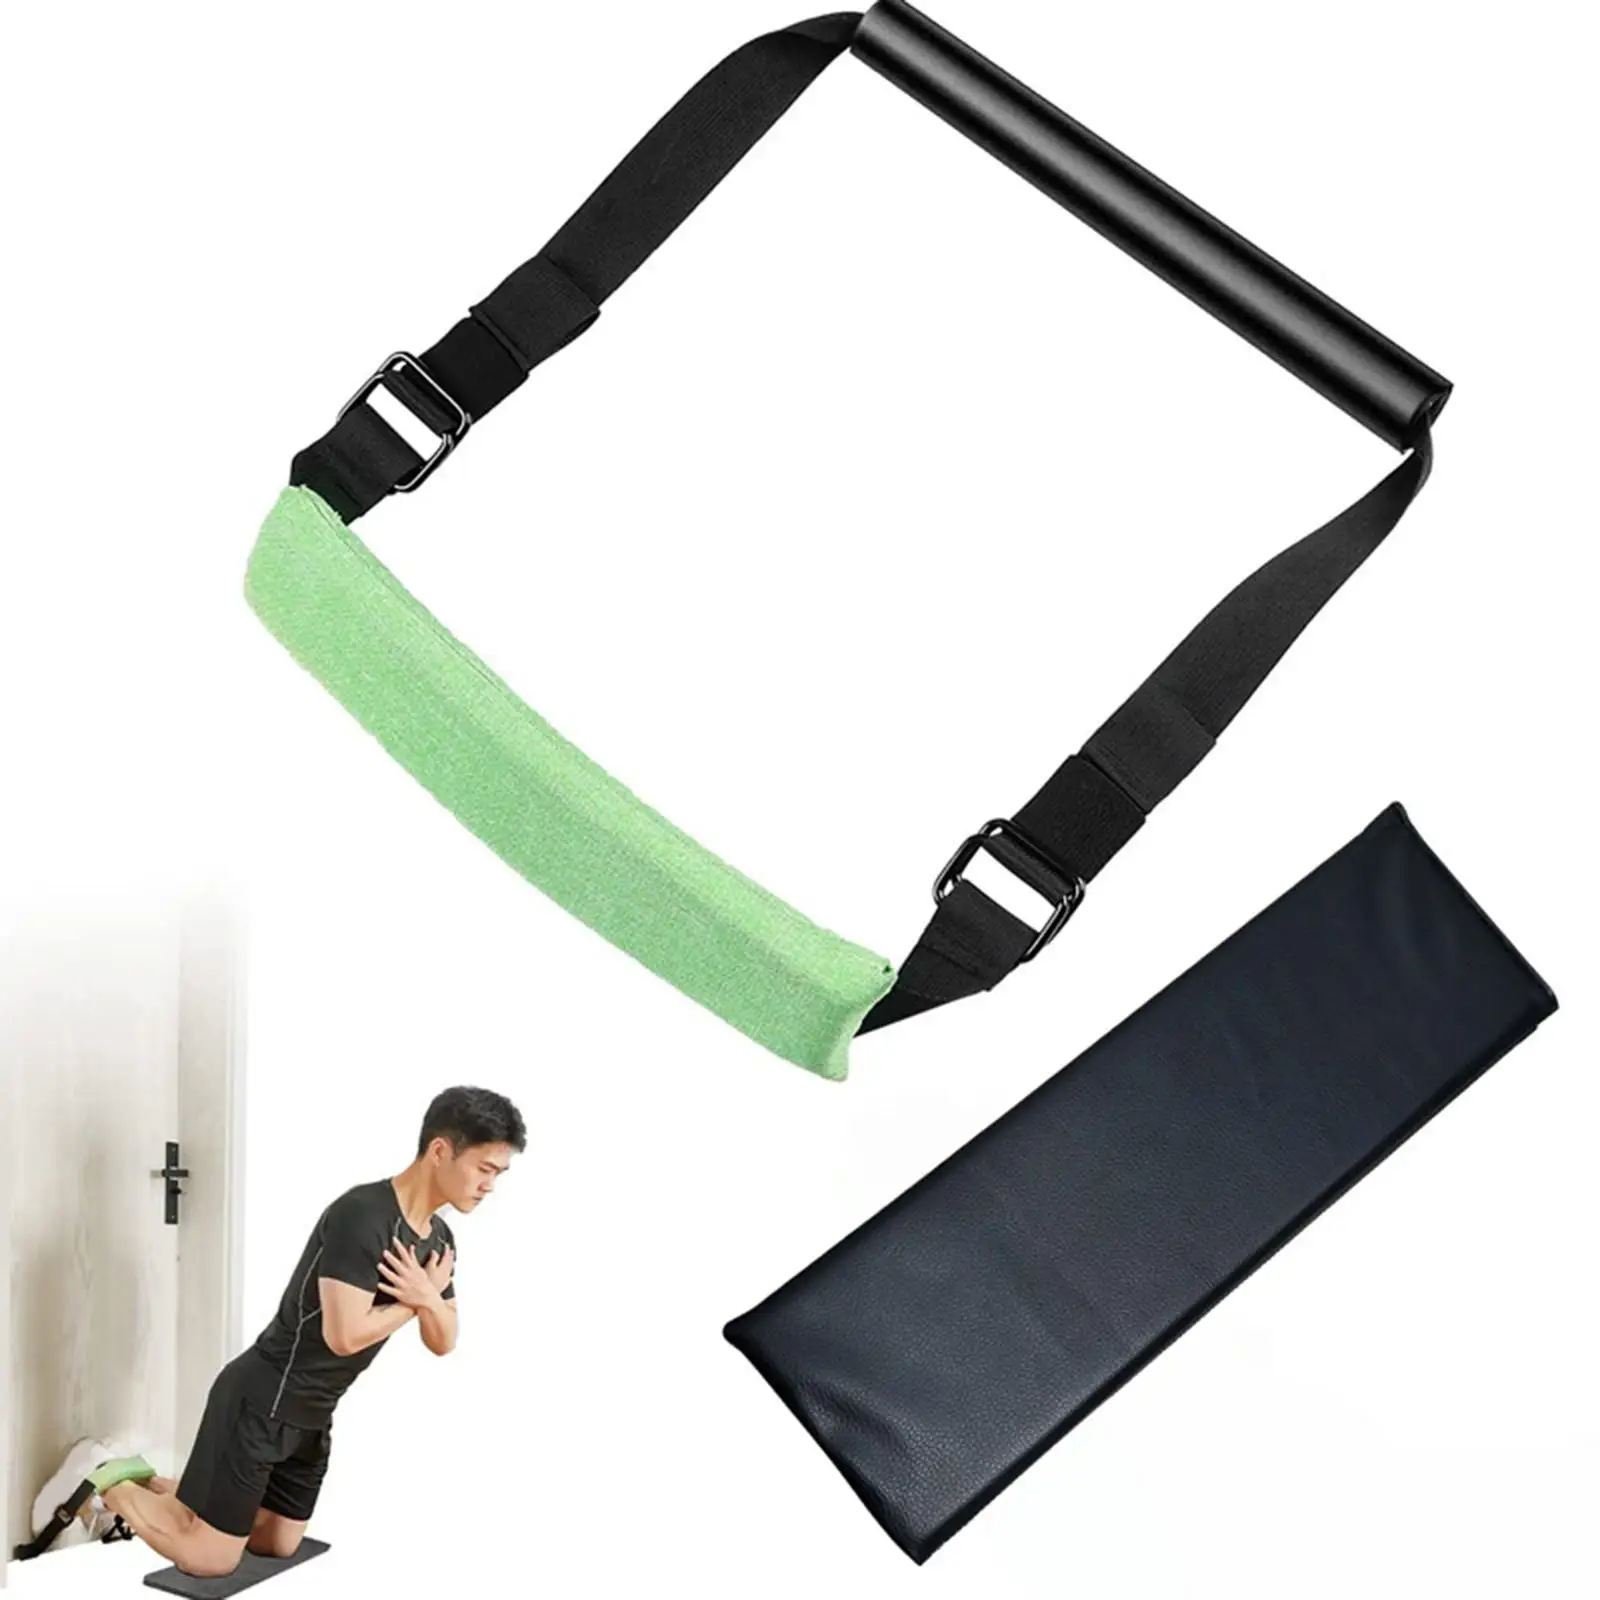 Sit Up Assistant Ab Leg Exercise with Foldling Pad Door Anchor Padded Foot Holder Abdominal Fitness Hamstring Strap Set